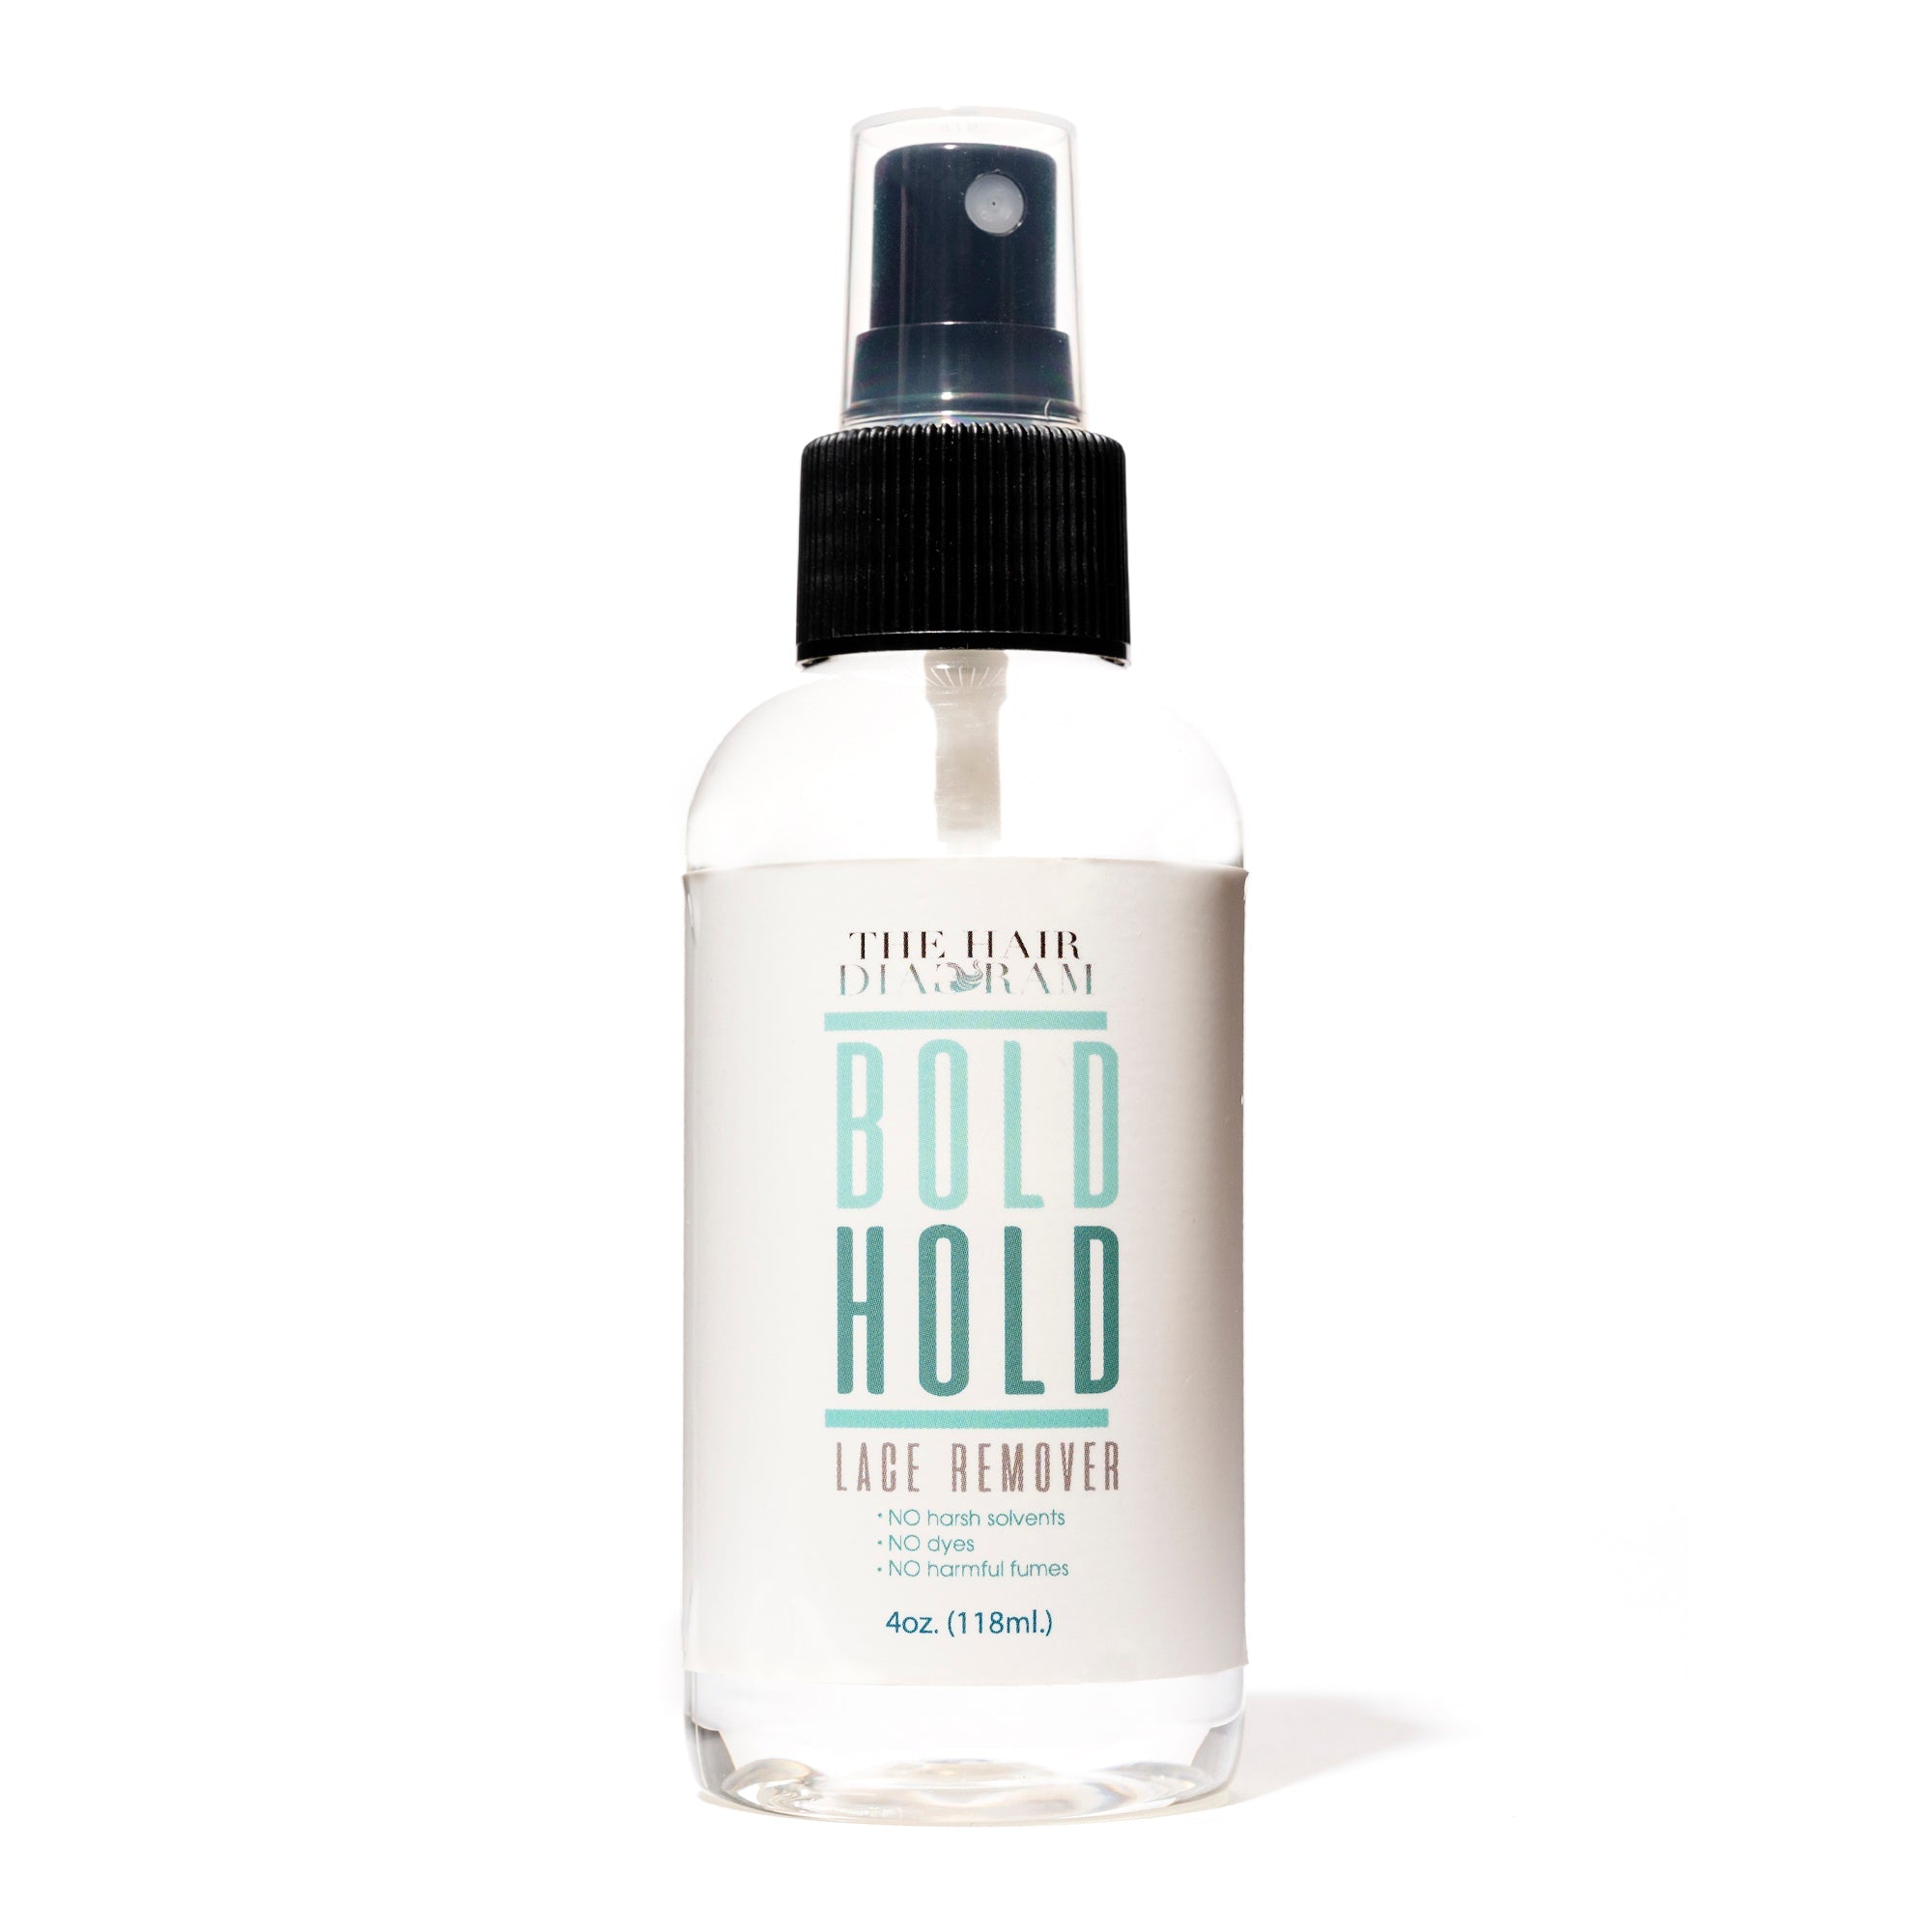 Bold Hold Lace Remover® 118ml